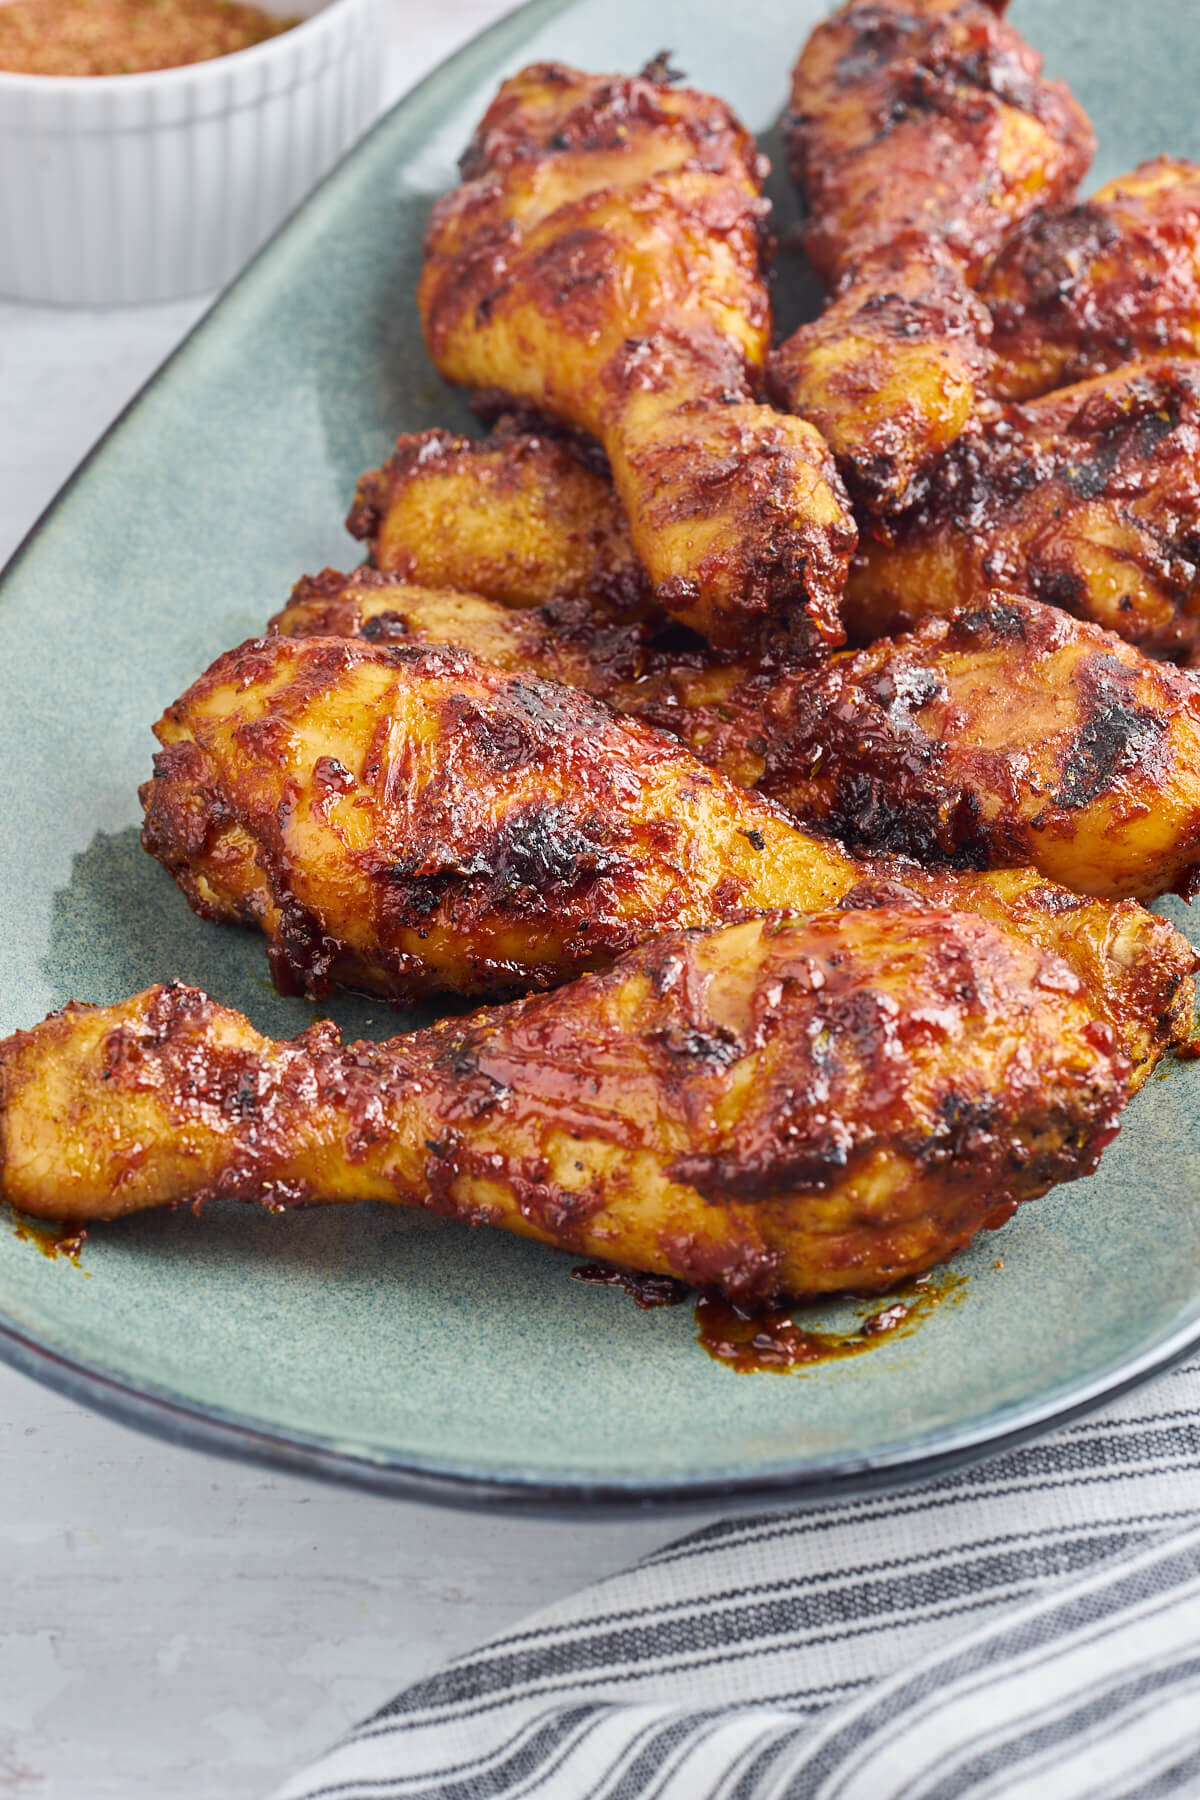 Grilled BBQ chicken legs - Easy recipe for drumsticks on grill